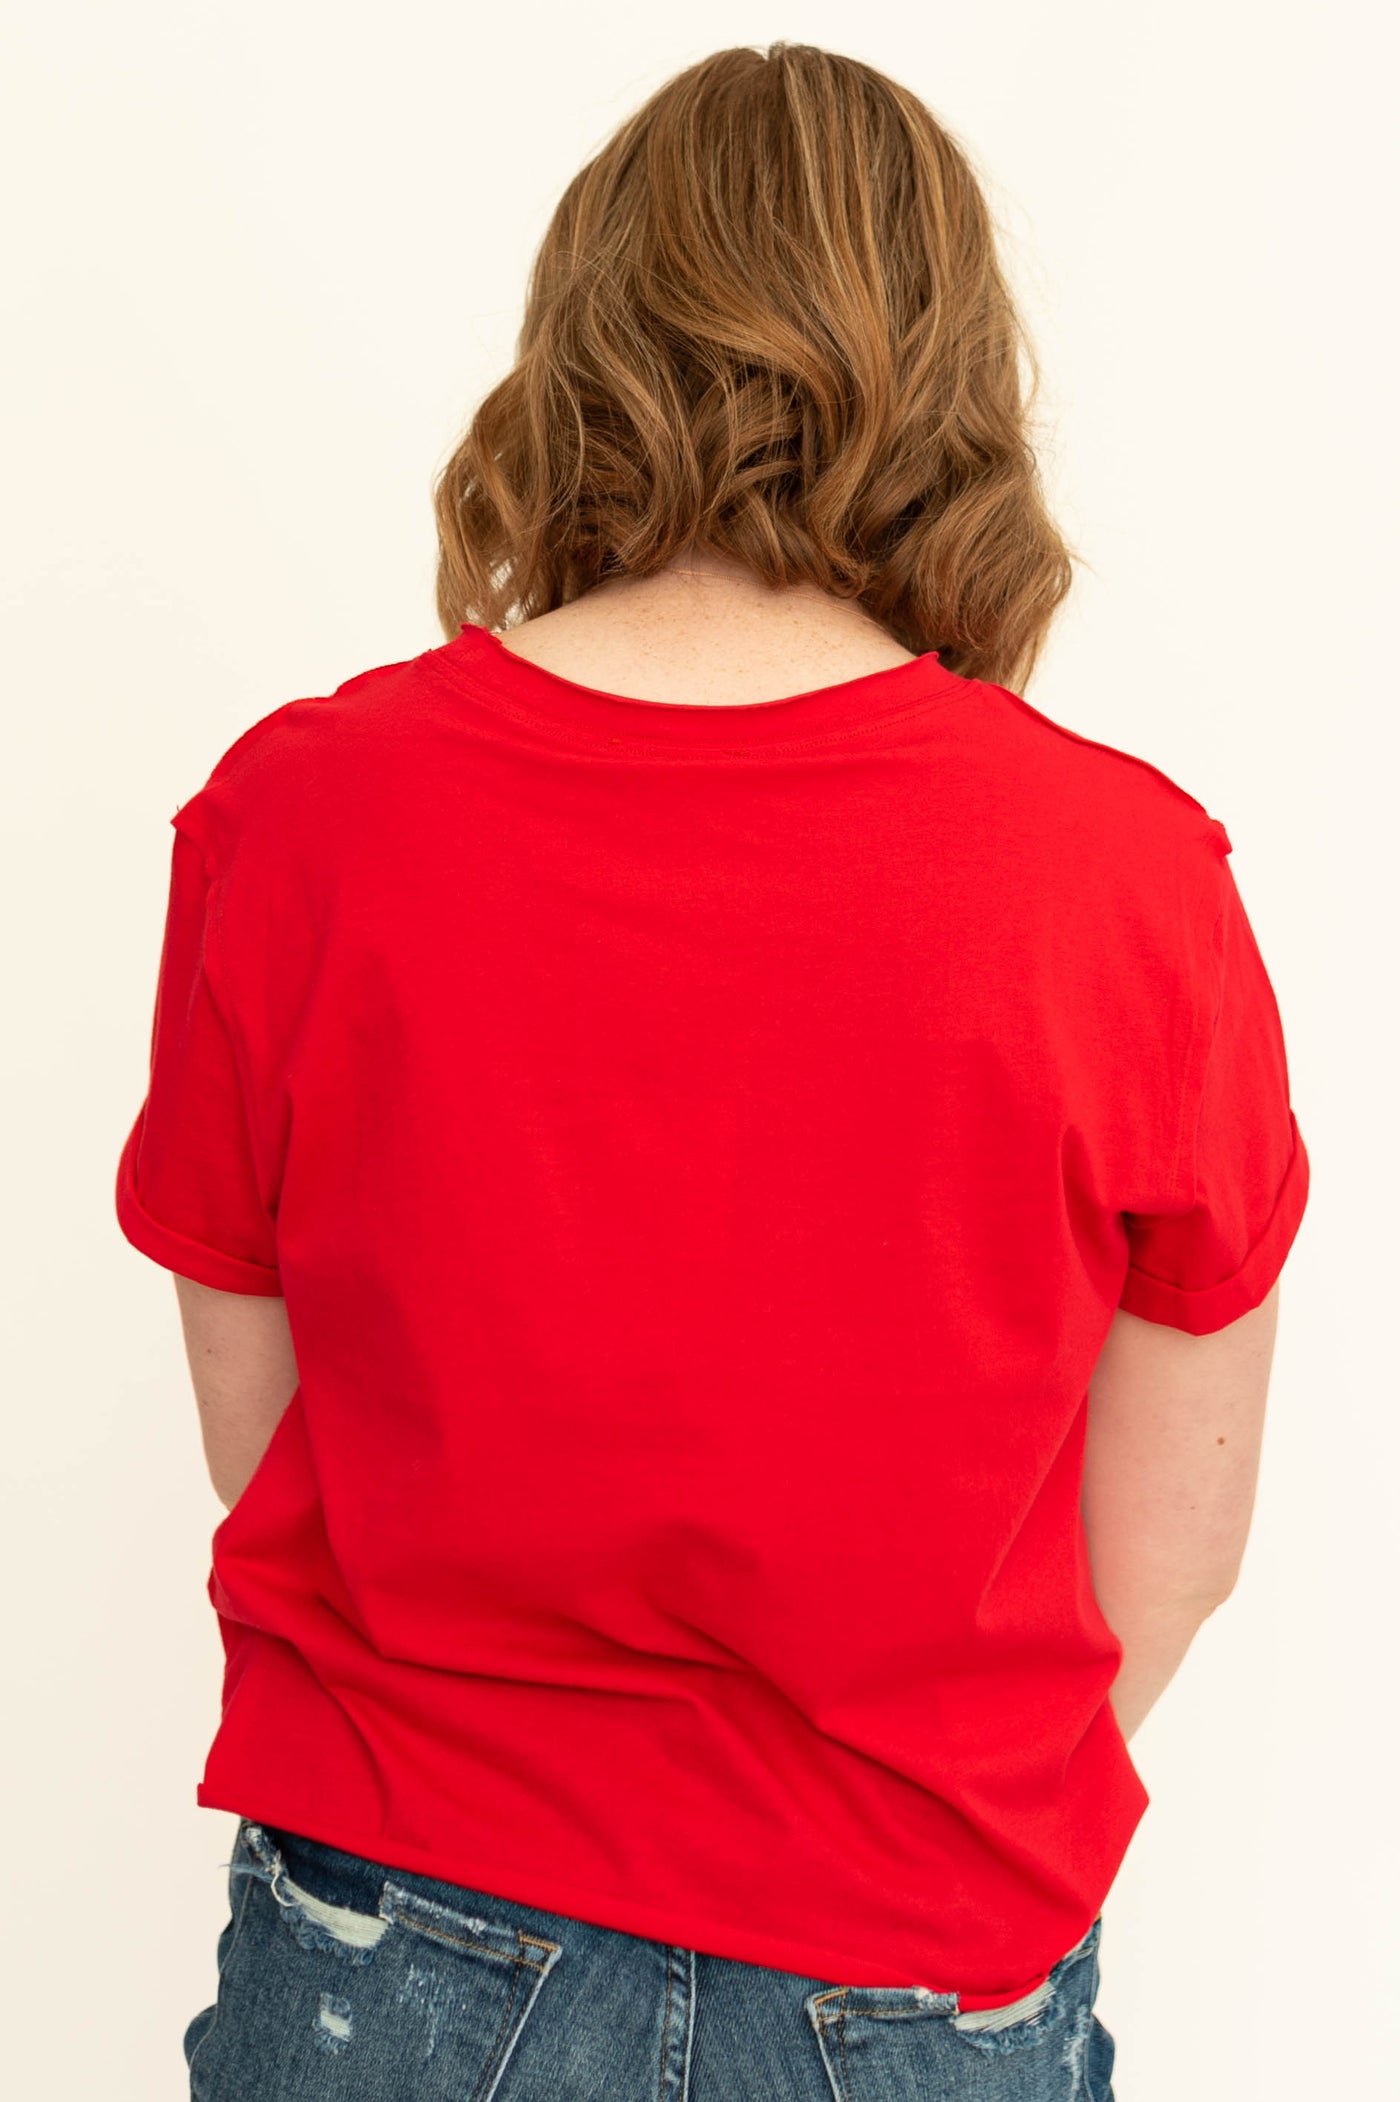 Back view of a red short sleeve top